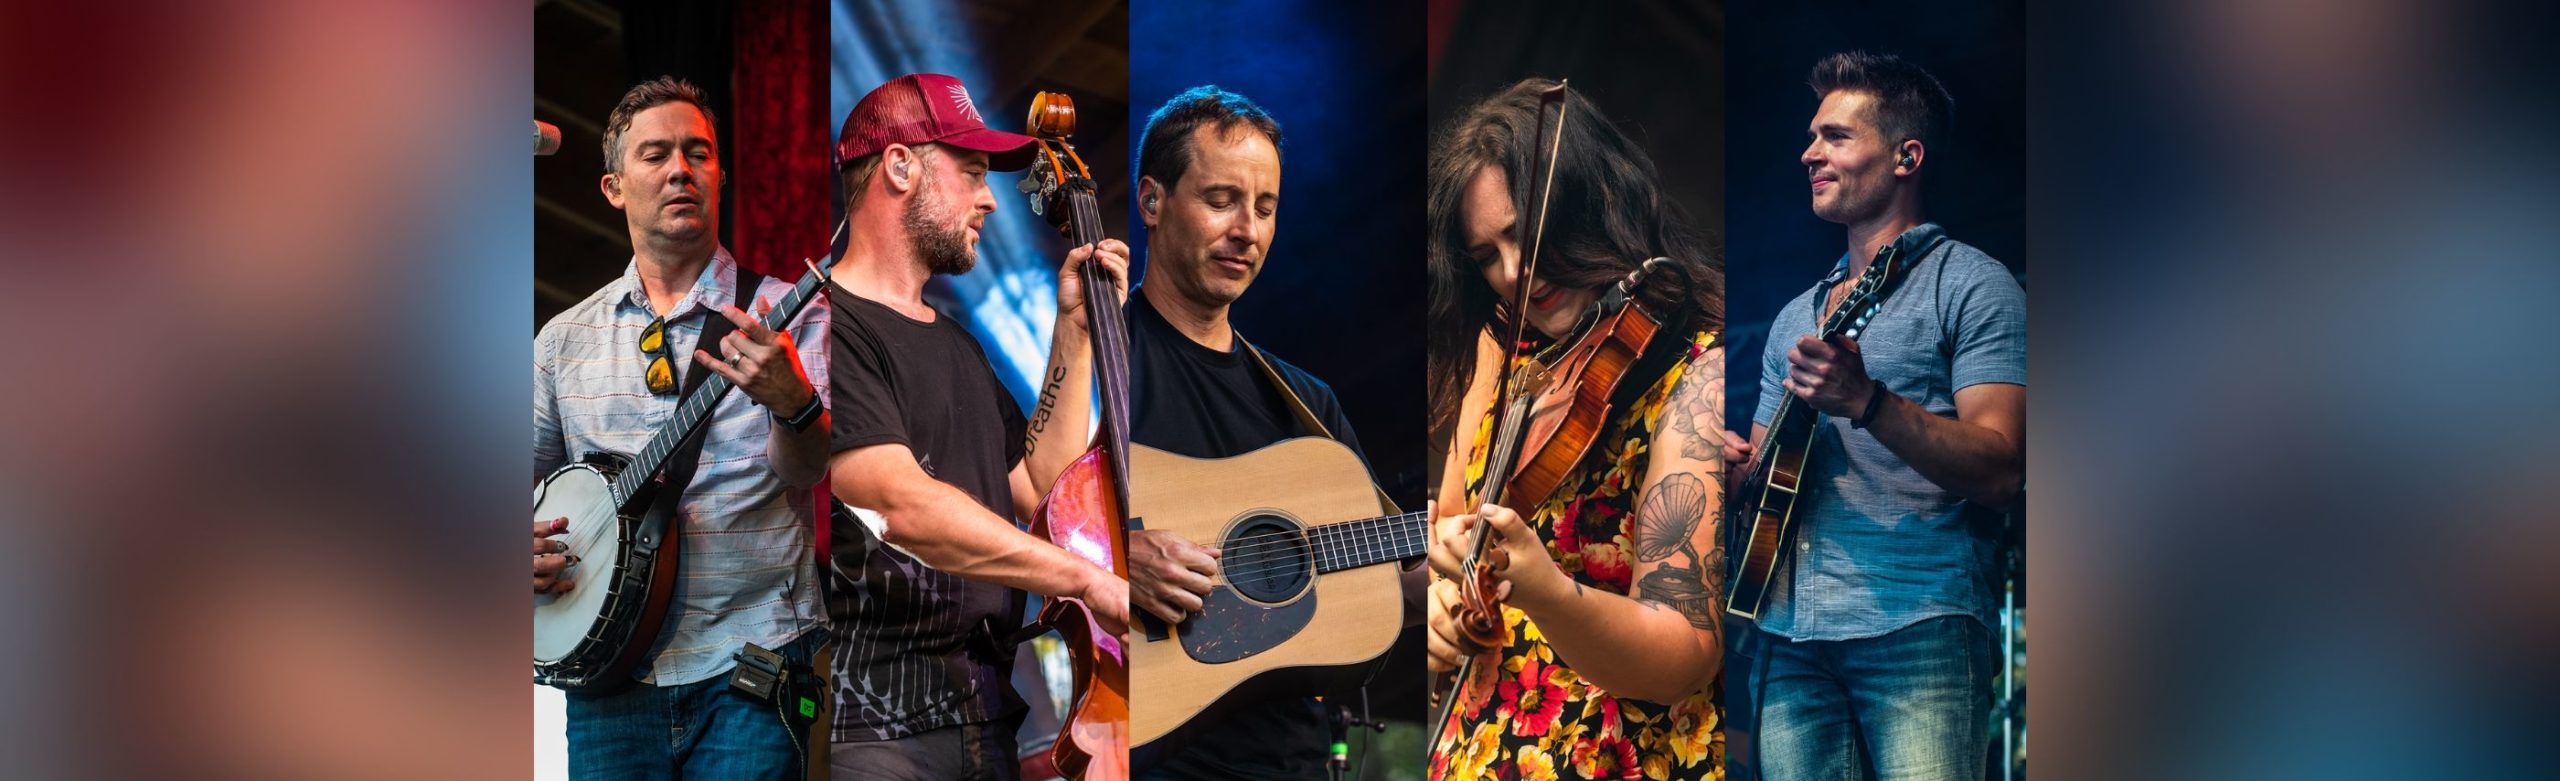 Event Info: Yonder Mountain String Band at Rialto 2020 Image